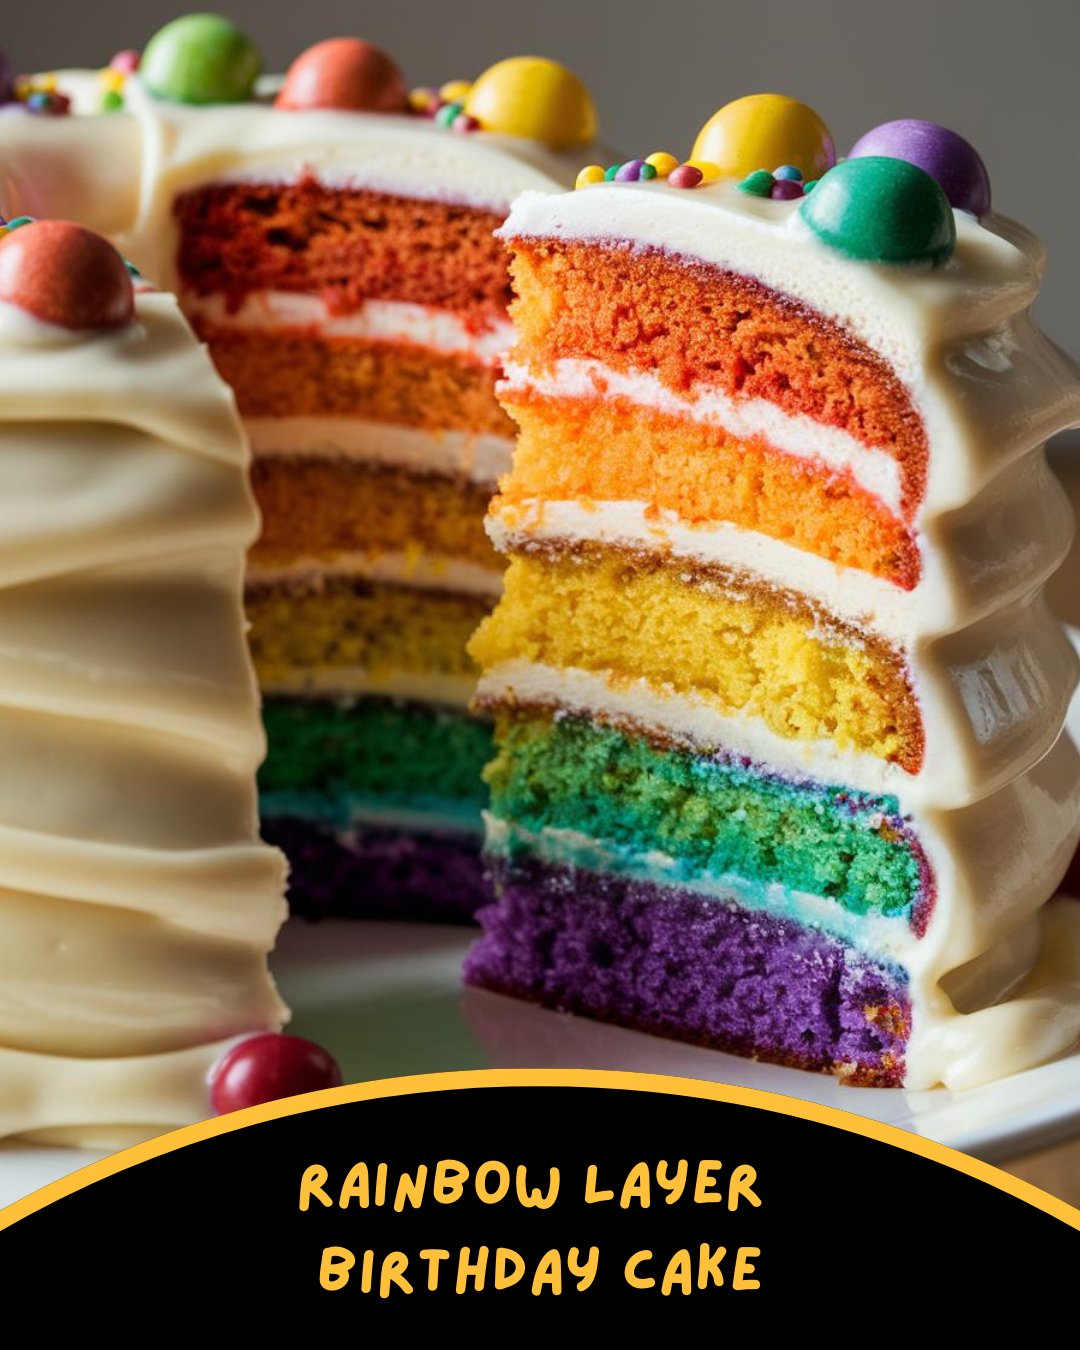 🎉 Looking for the perfect centerpiece for your next birthday bash? Look no further! Our Multi-Layer Rainbow Birthday Cake is not just a cake, it's a party in itself! 🎉